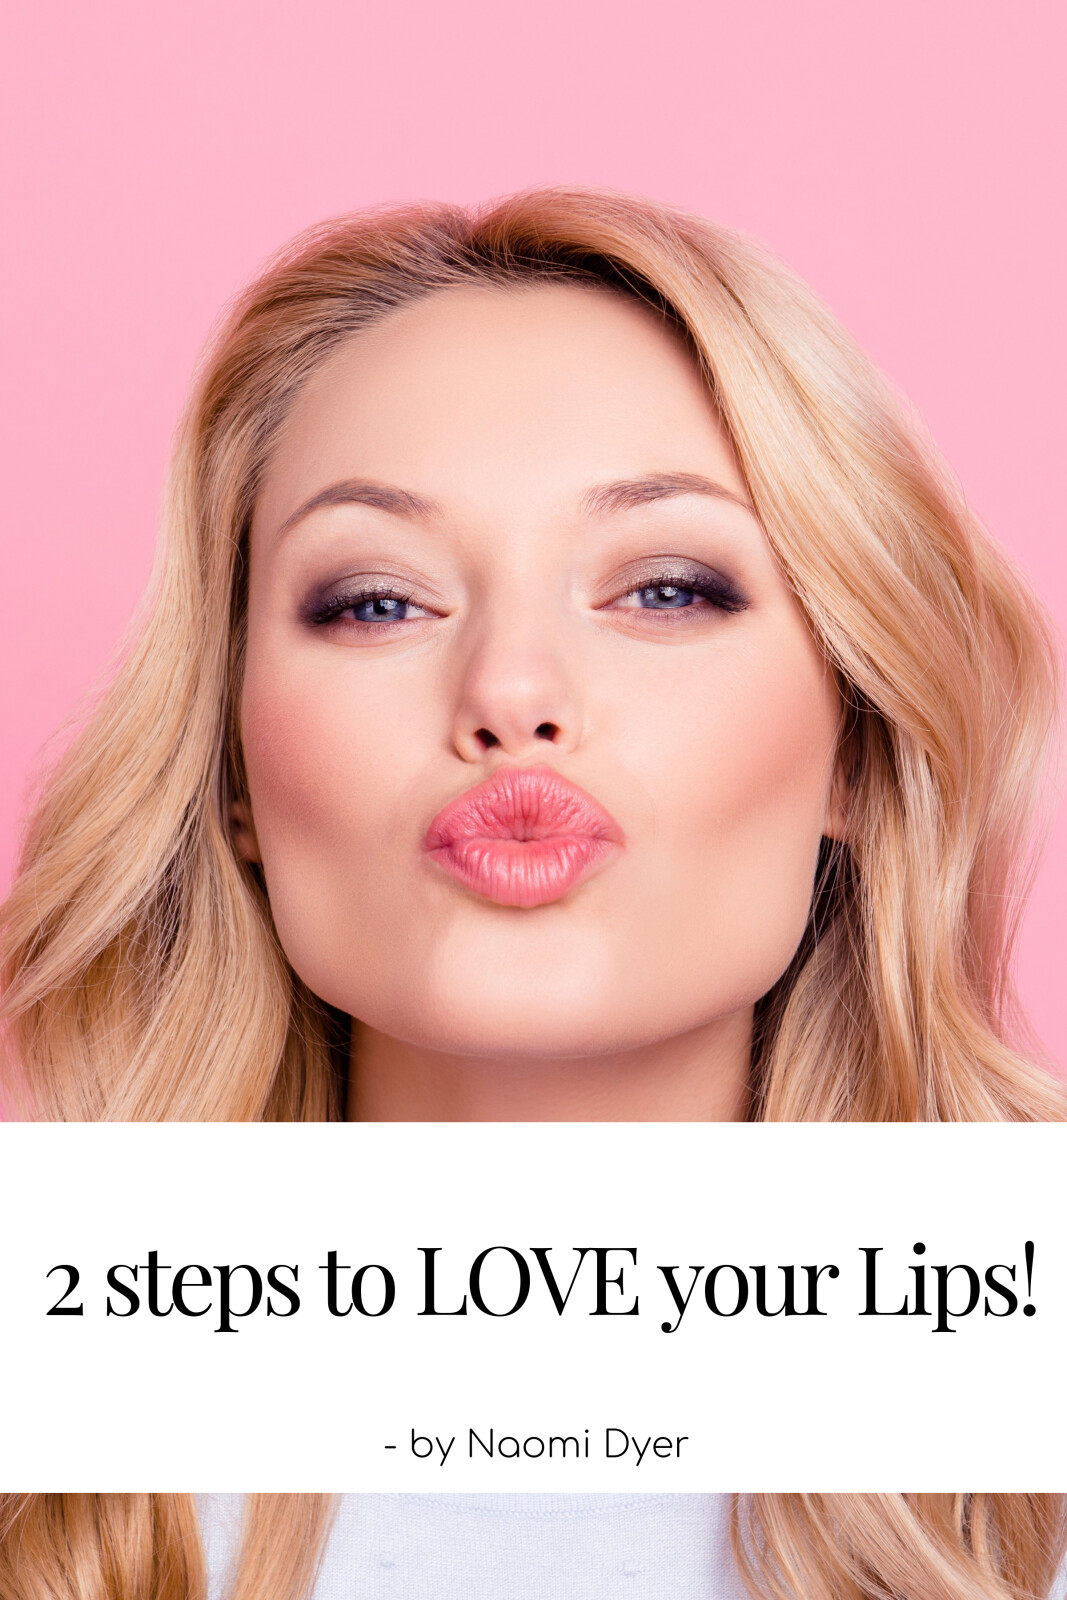 2 steps to LOVE your LIPS!